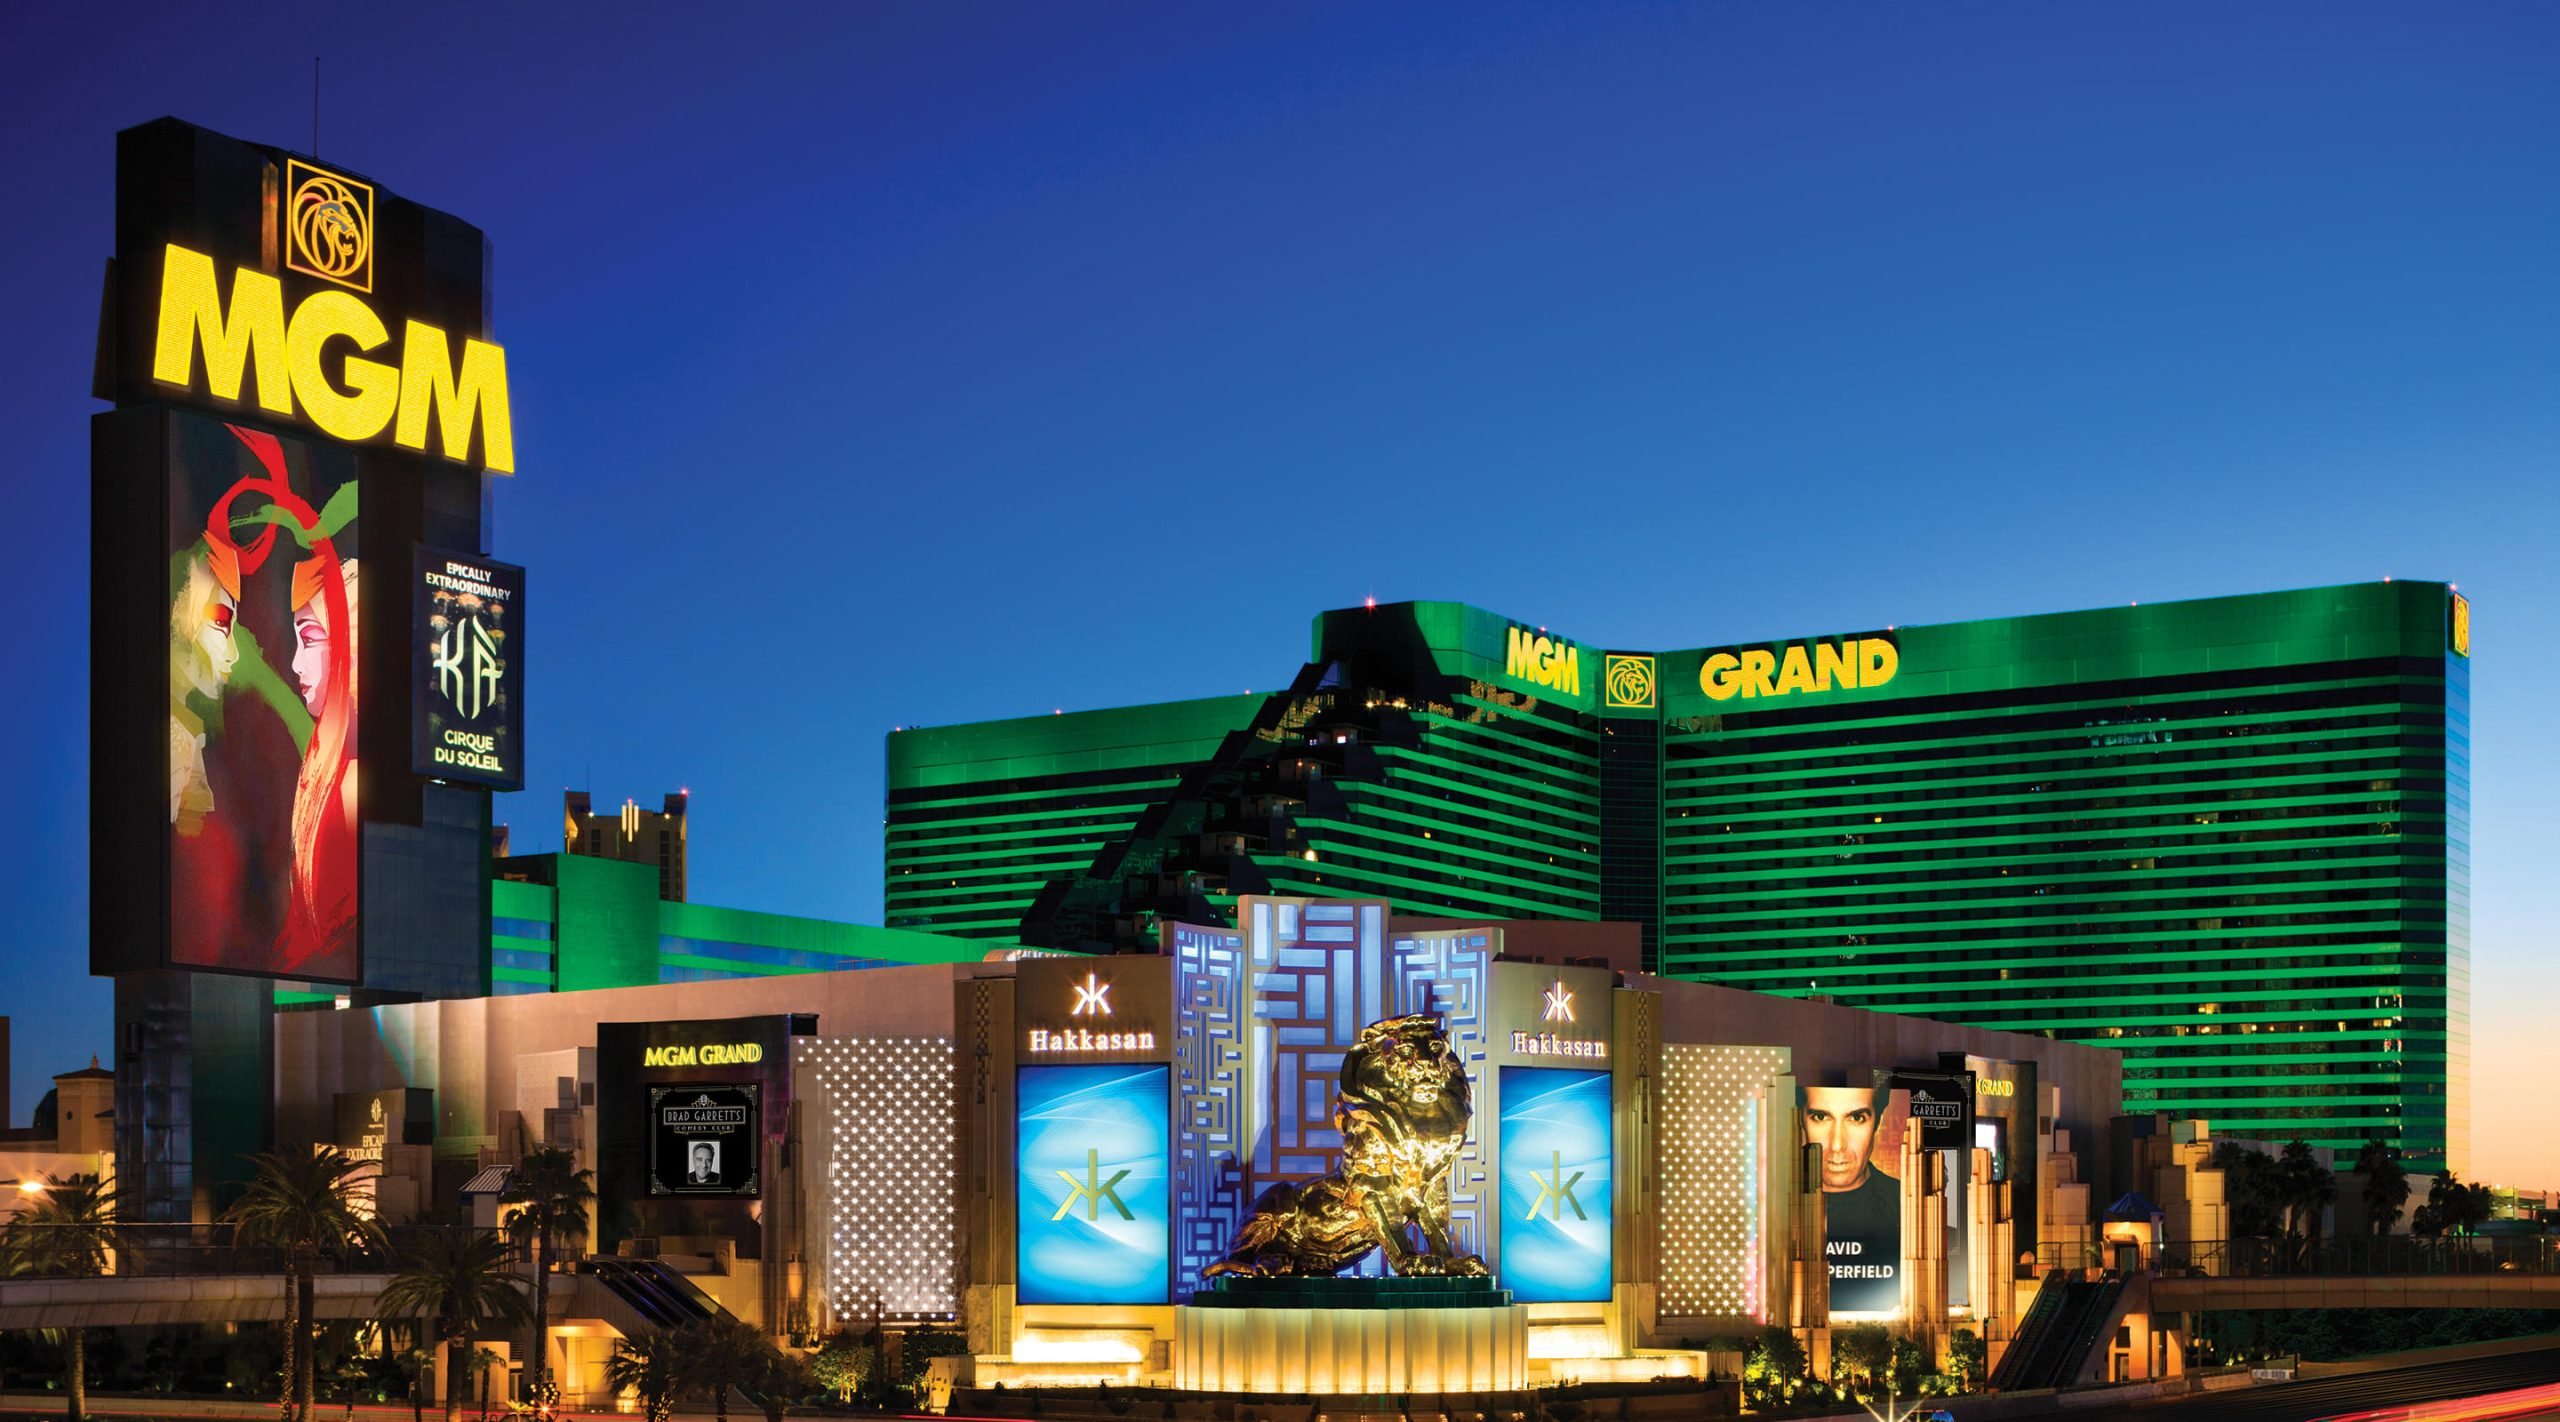 MGM Grand Largest Hotel Structure In World, Says Record Academy